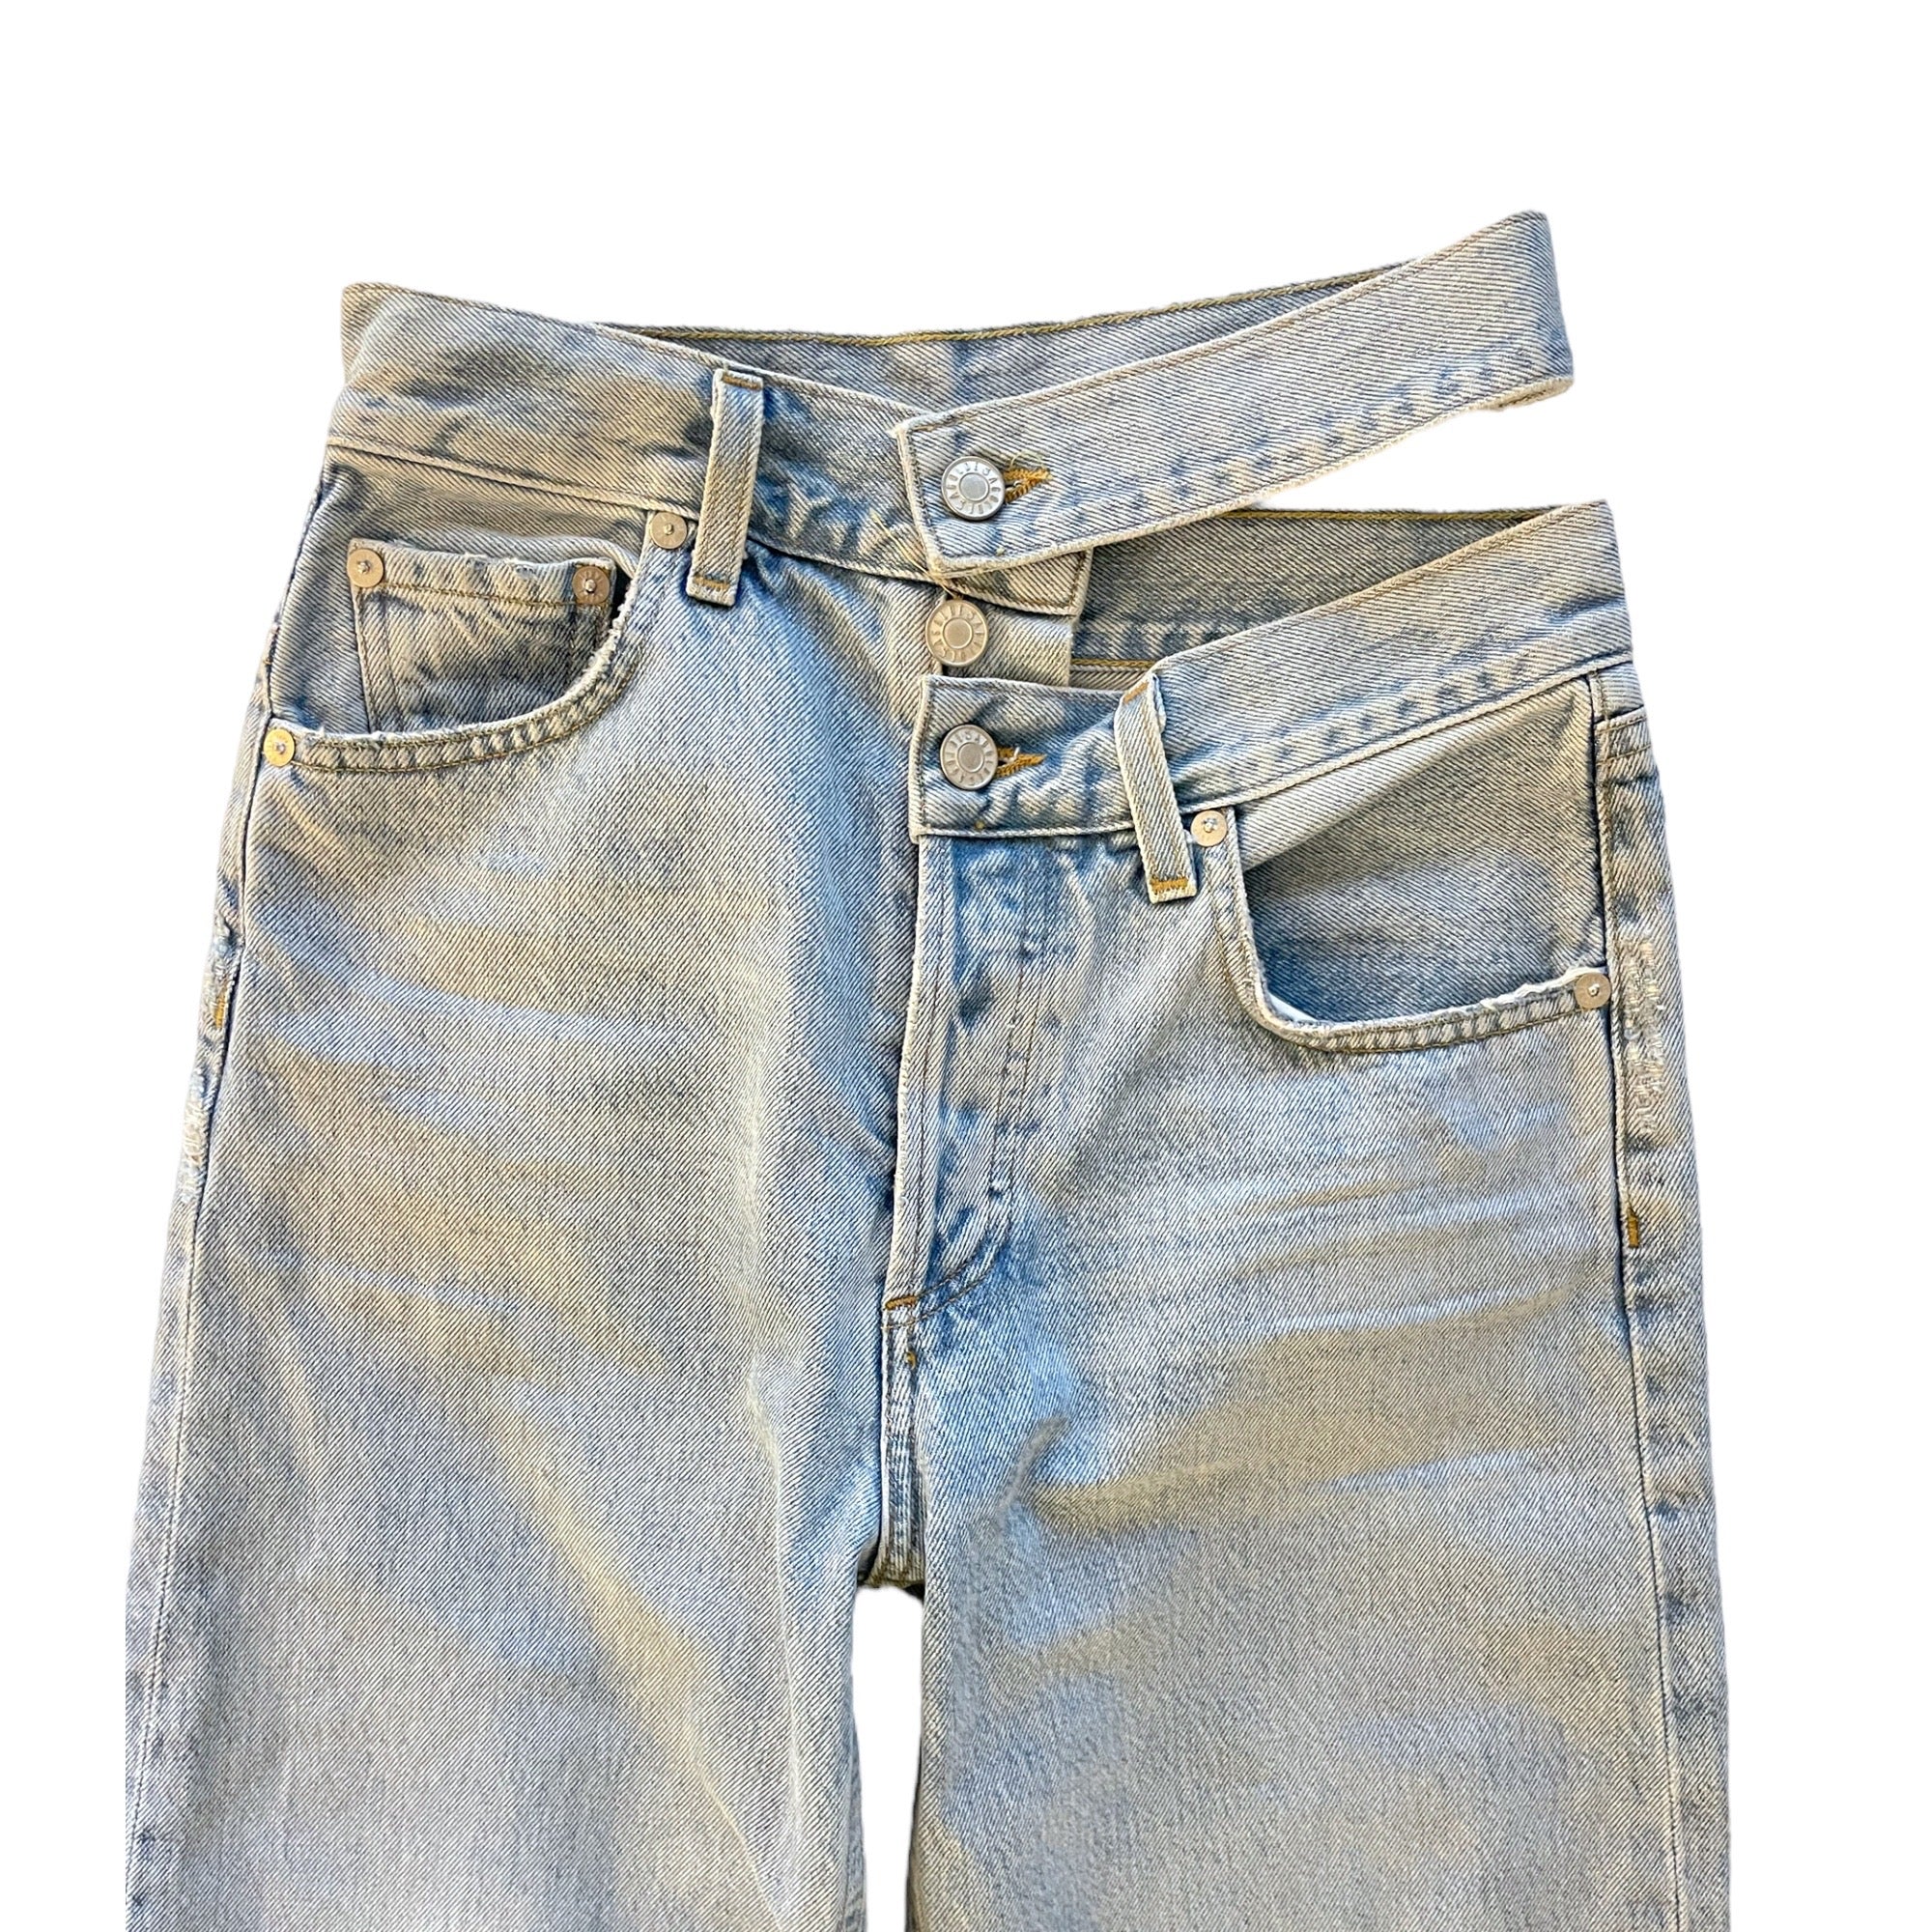 AGOLDE High-Rise Straight Leg Jeans
| Size: XS | US 24 |